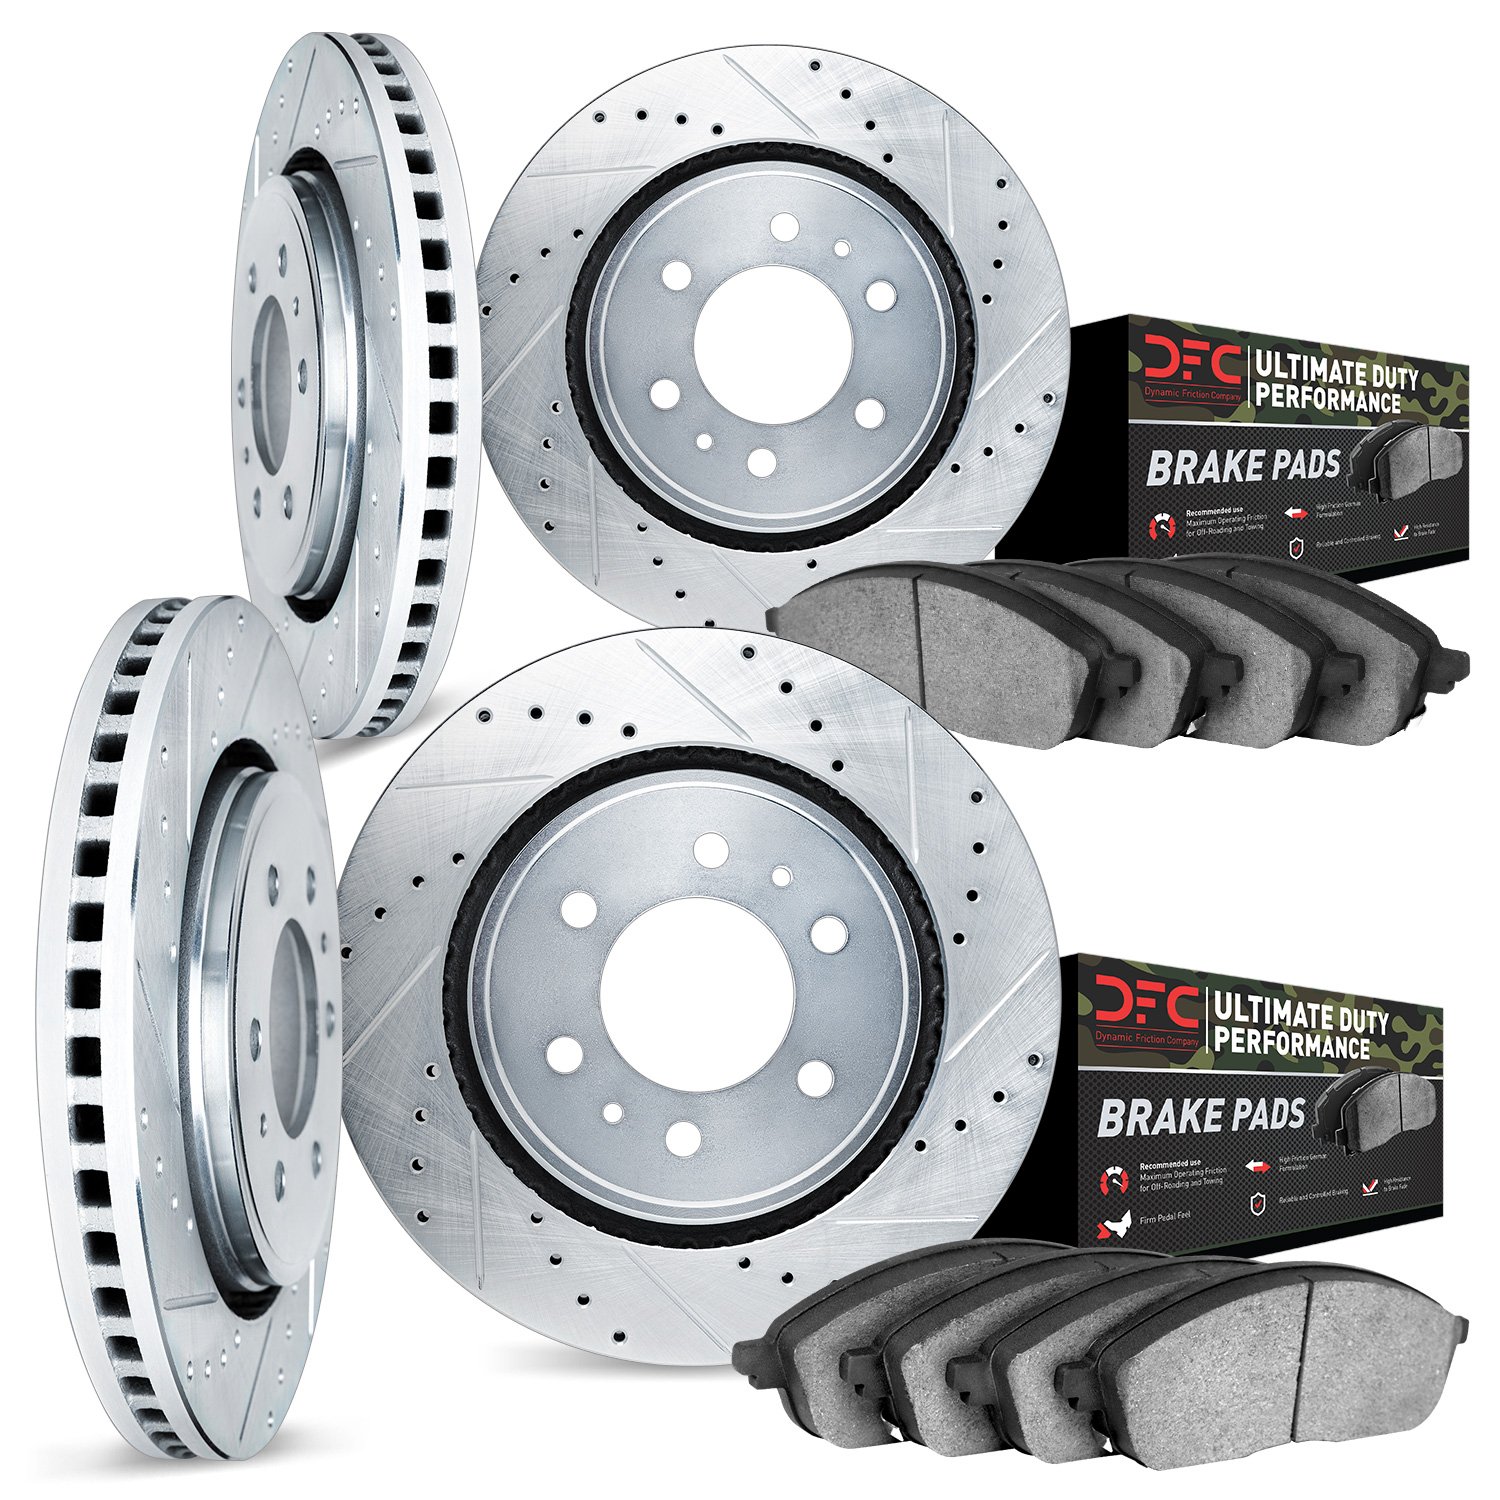 7404-48018 Drilled/Slotted Brake Rotors with Ultimate-Duty Brake Pads Kit [Silver], 2009-2014 GM, Position: Front and Rear